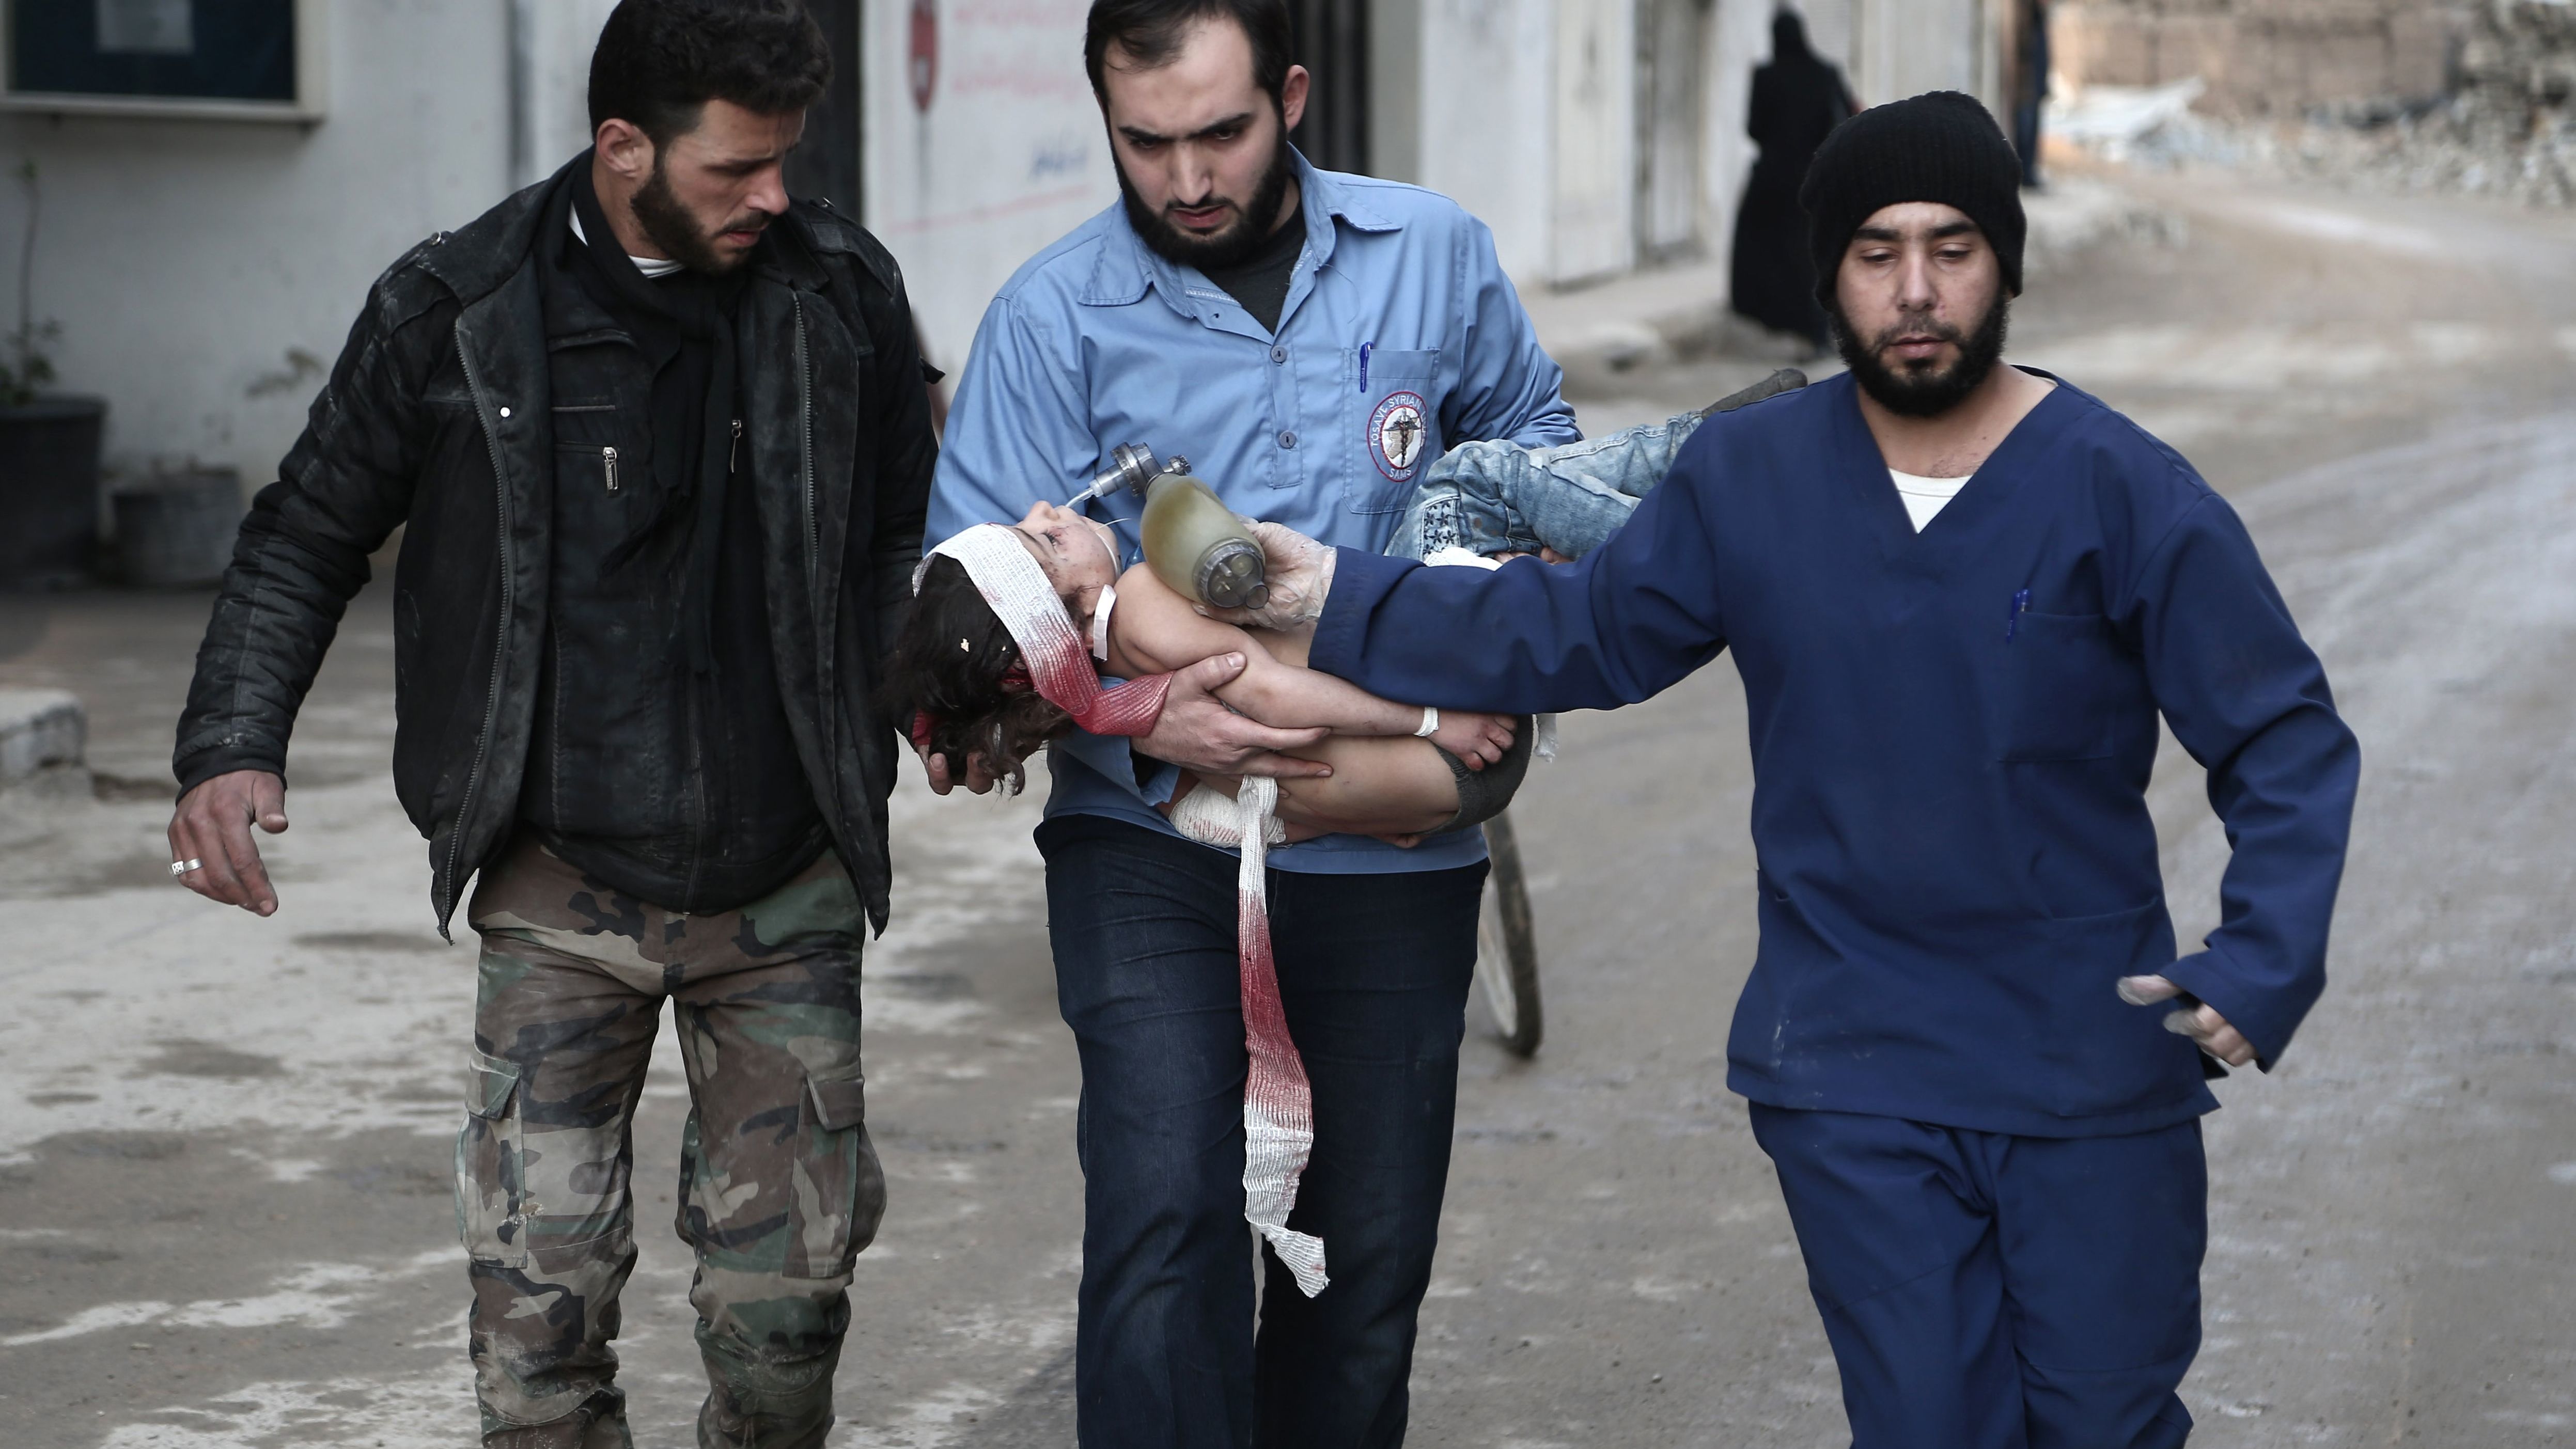 Rescuers from the volunteer White Helmets rescue group with a girl they pulled from the rubble following airstrikes in Eastern Ghouta, Syria, on Saturday. 